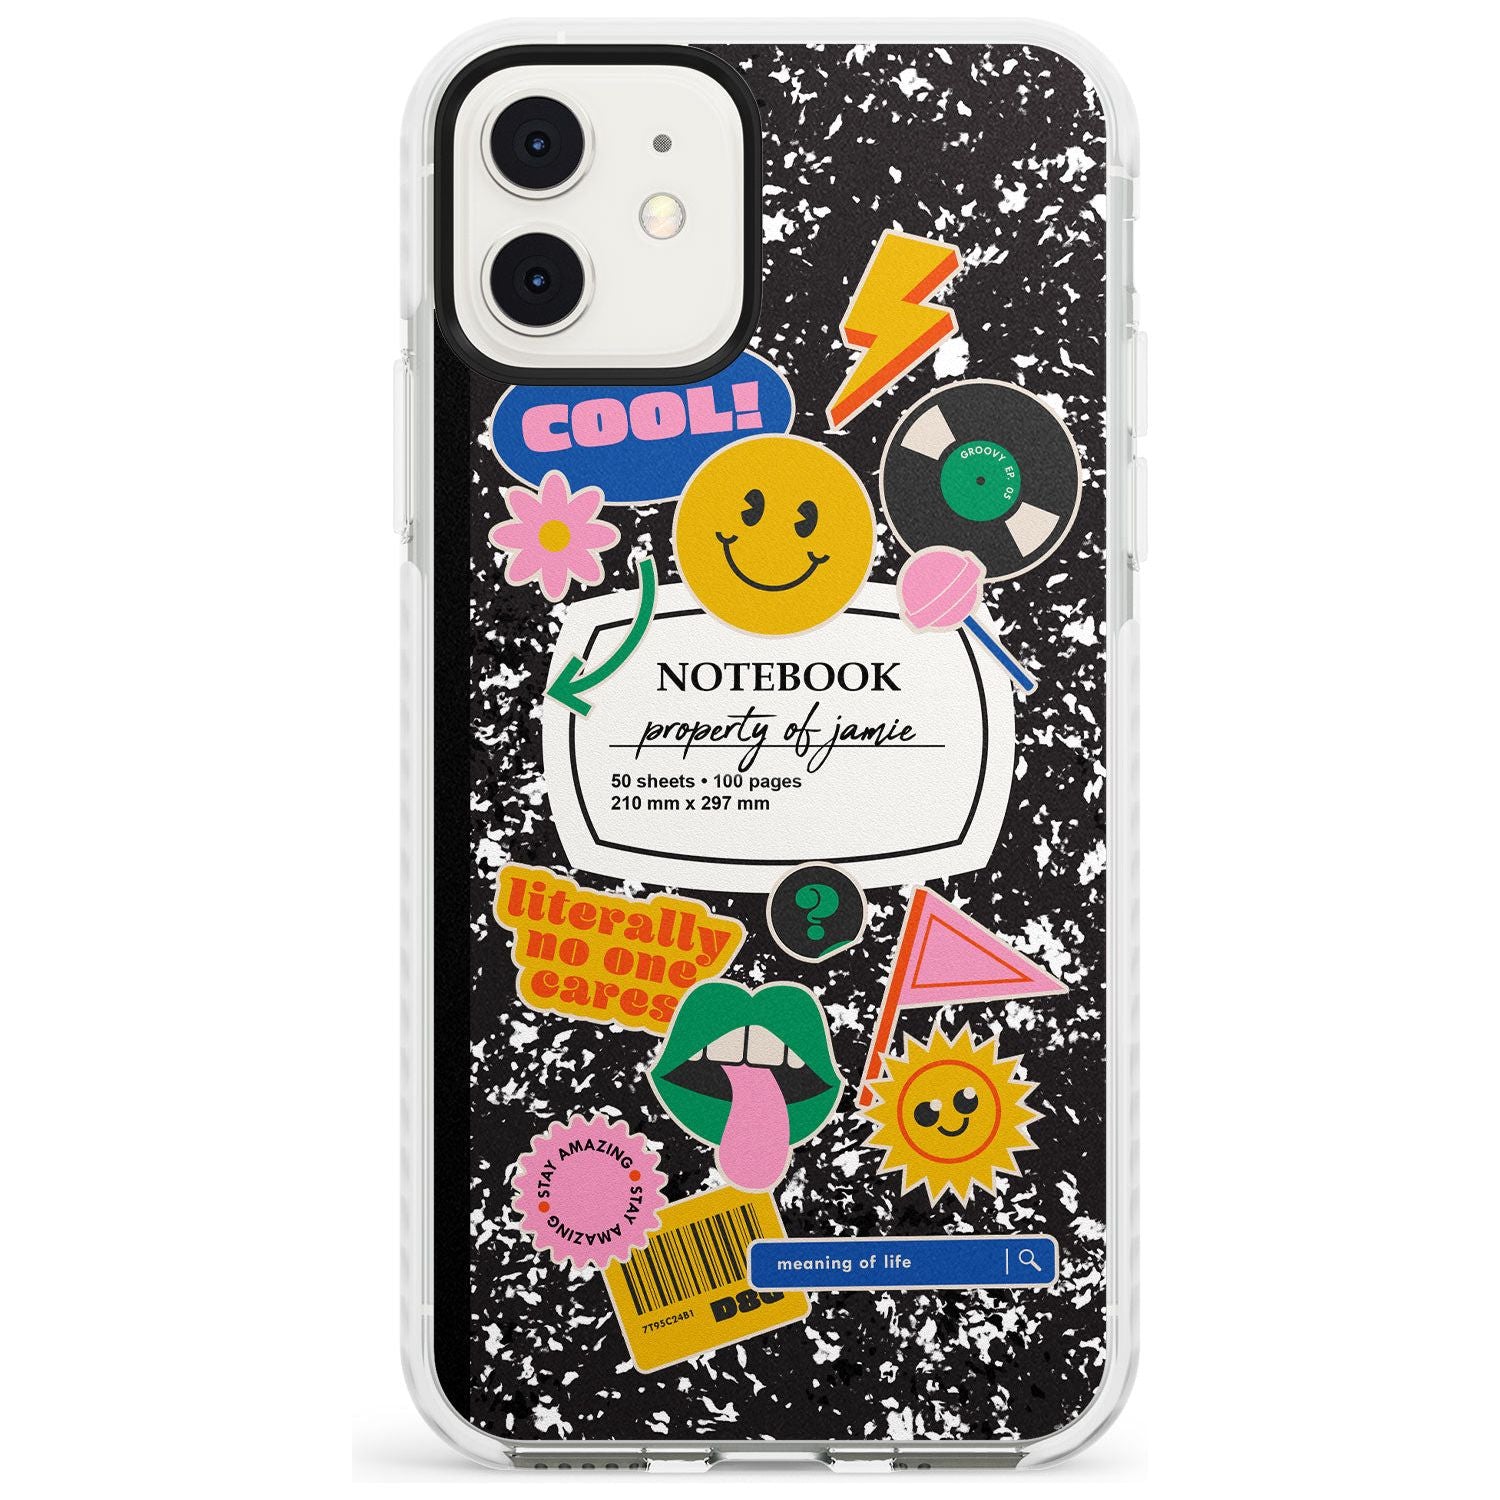 Custom Notebook Cover with Stickers Slim TPU Phone Case for iPhone 11